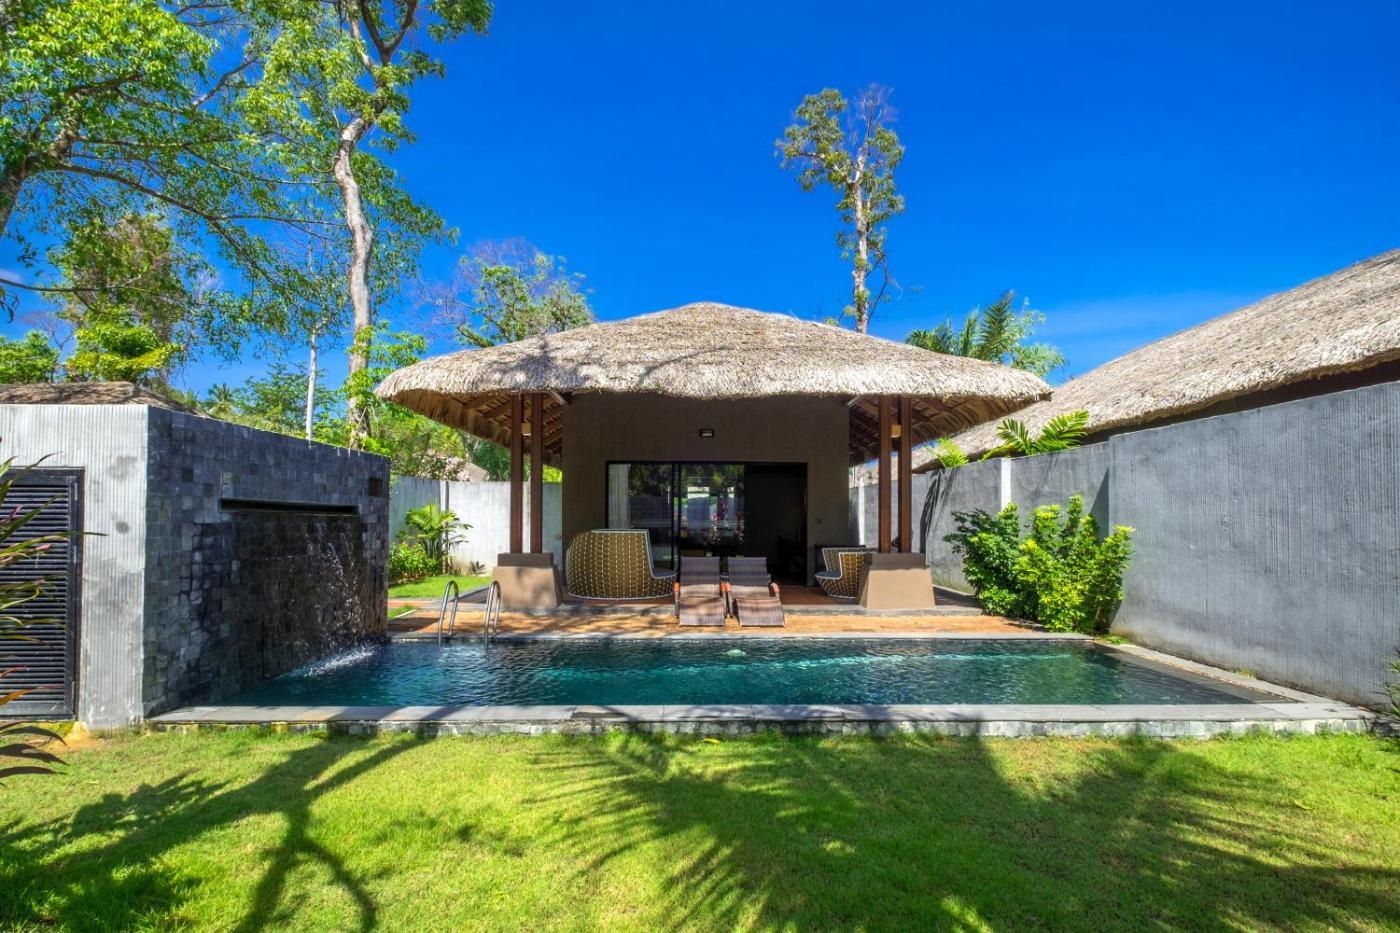 Hotel with private pool - Beyond Resort Khaolak